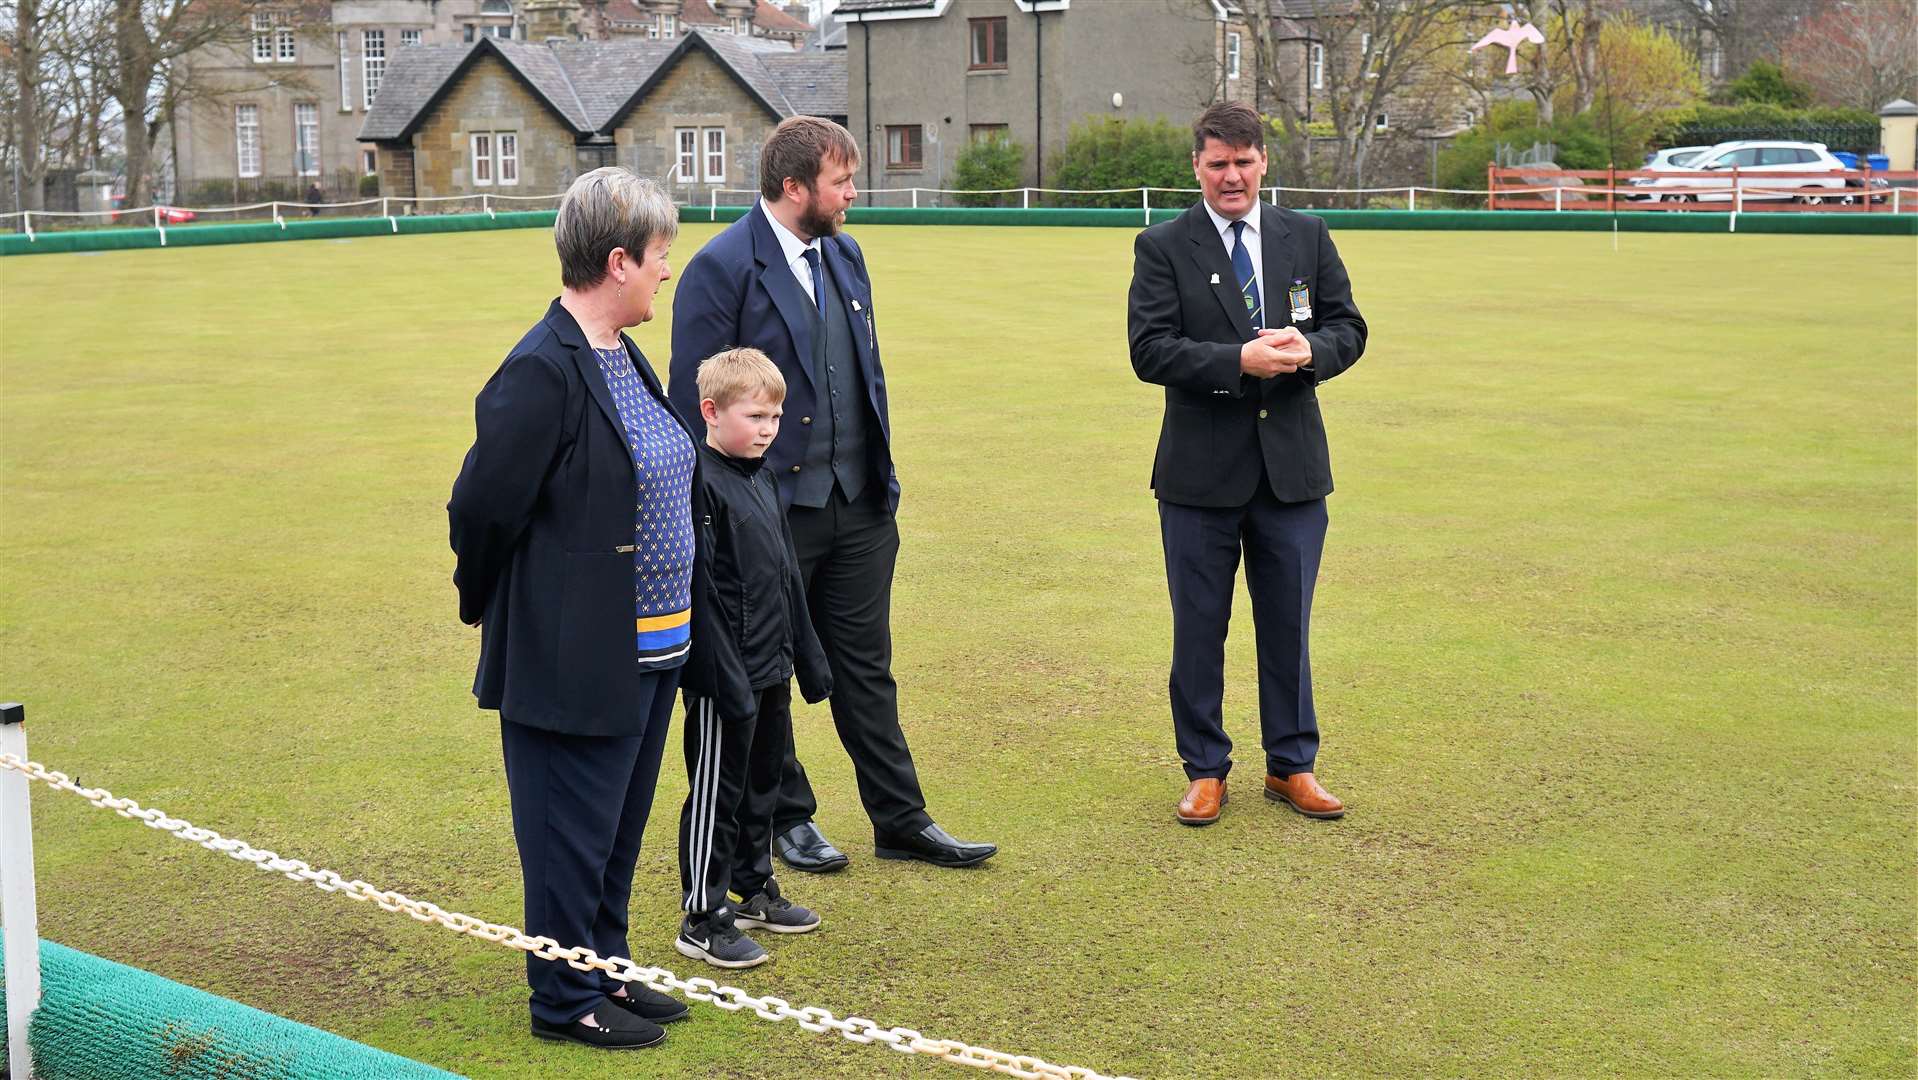 Graham John, the club's elected president, on the far right standing next to Mark Banks, his son Oscar and committee member Sharon Rosie as they welcome back members at the special opening event. Picture: DGS